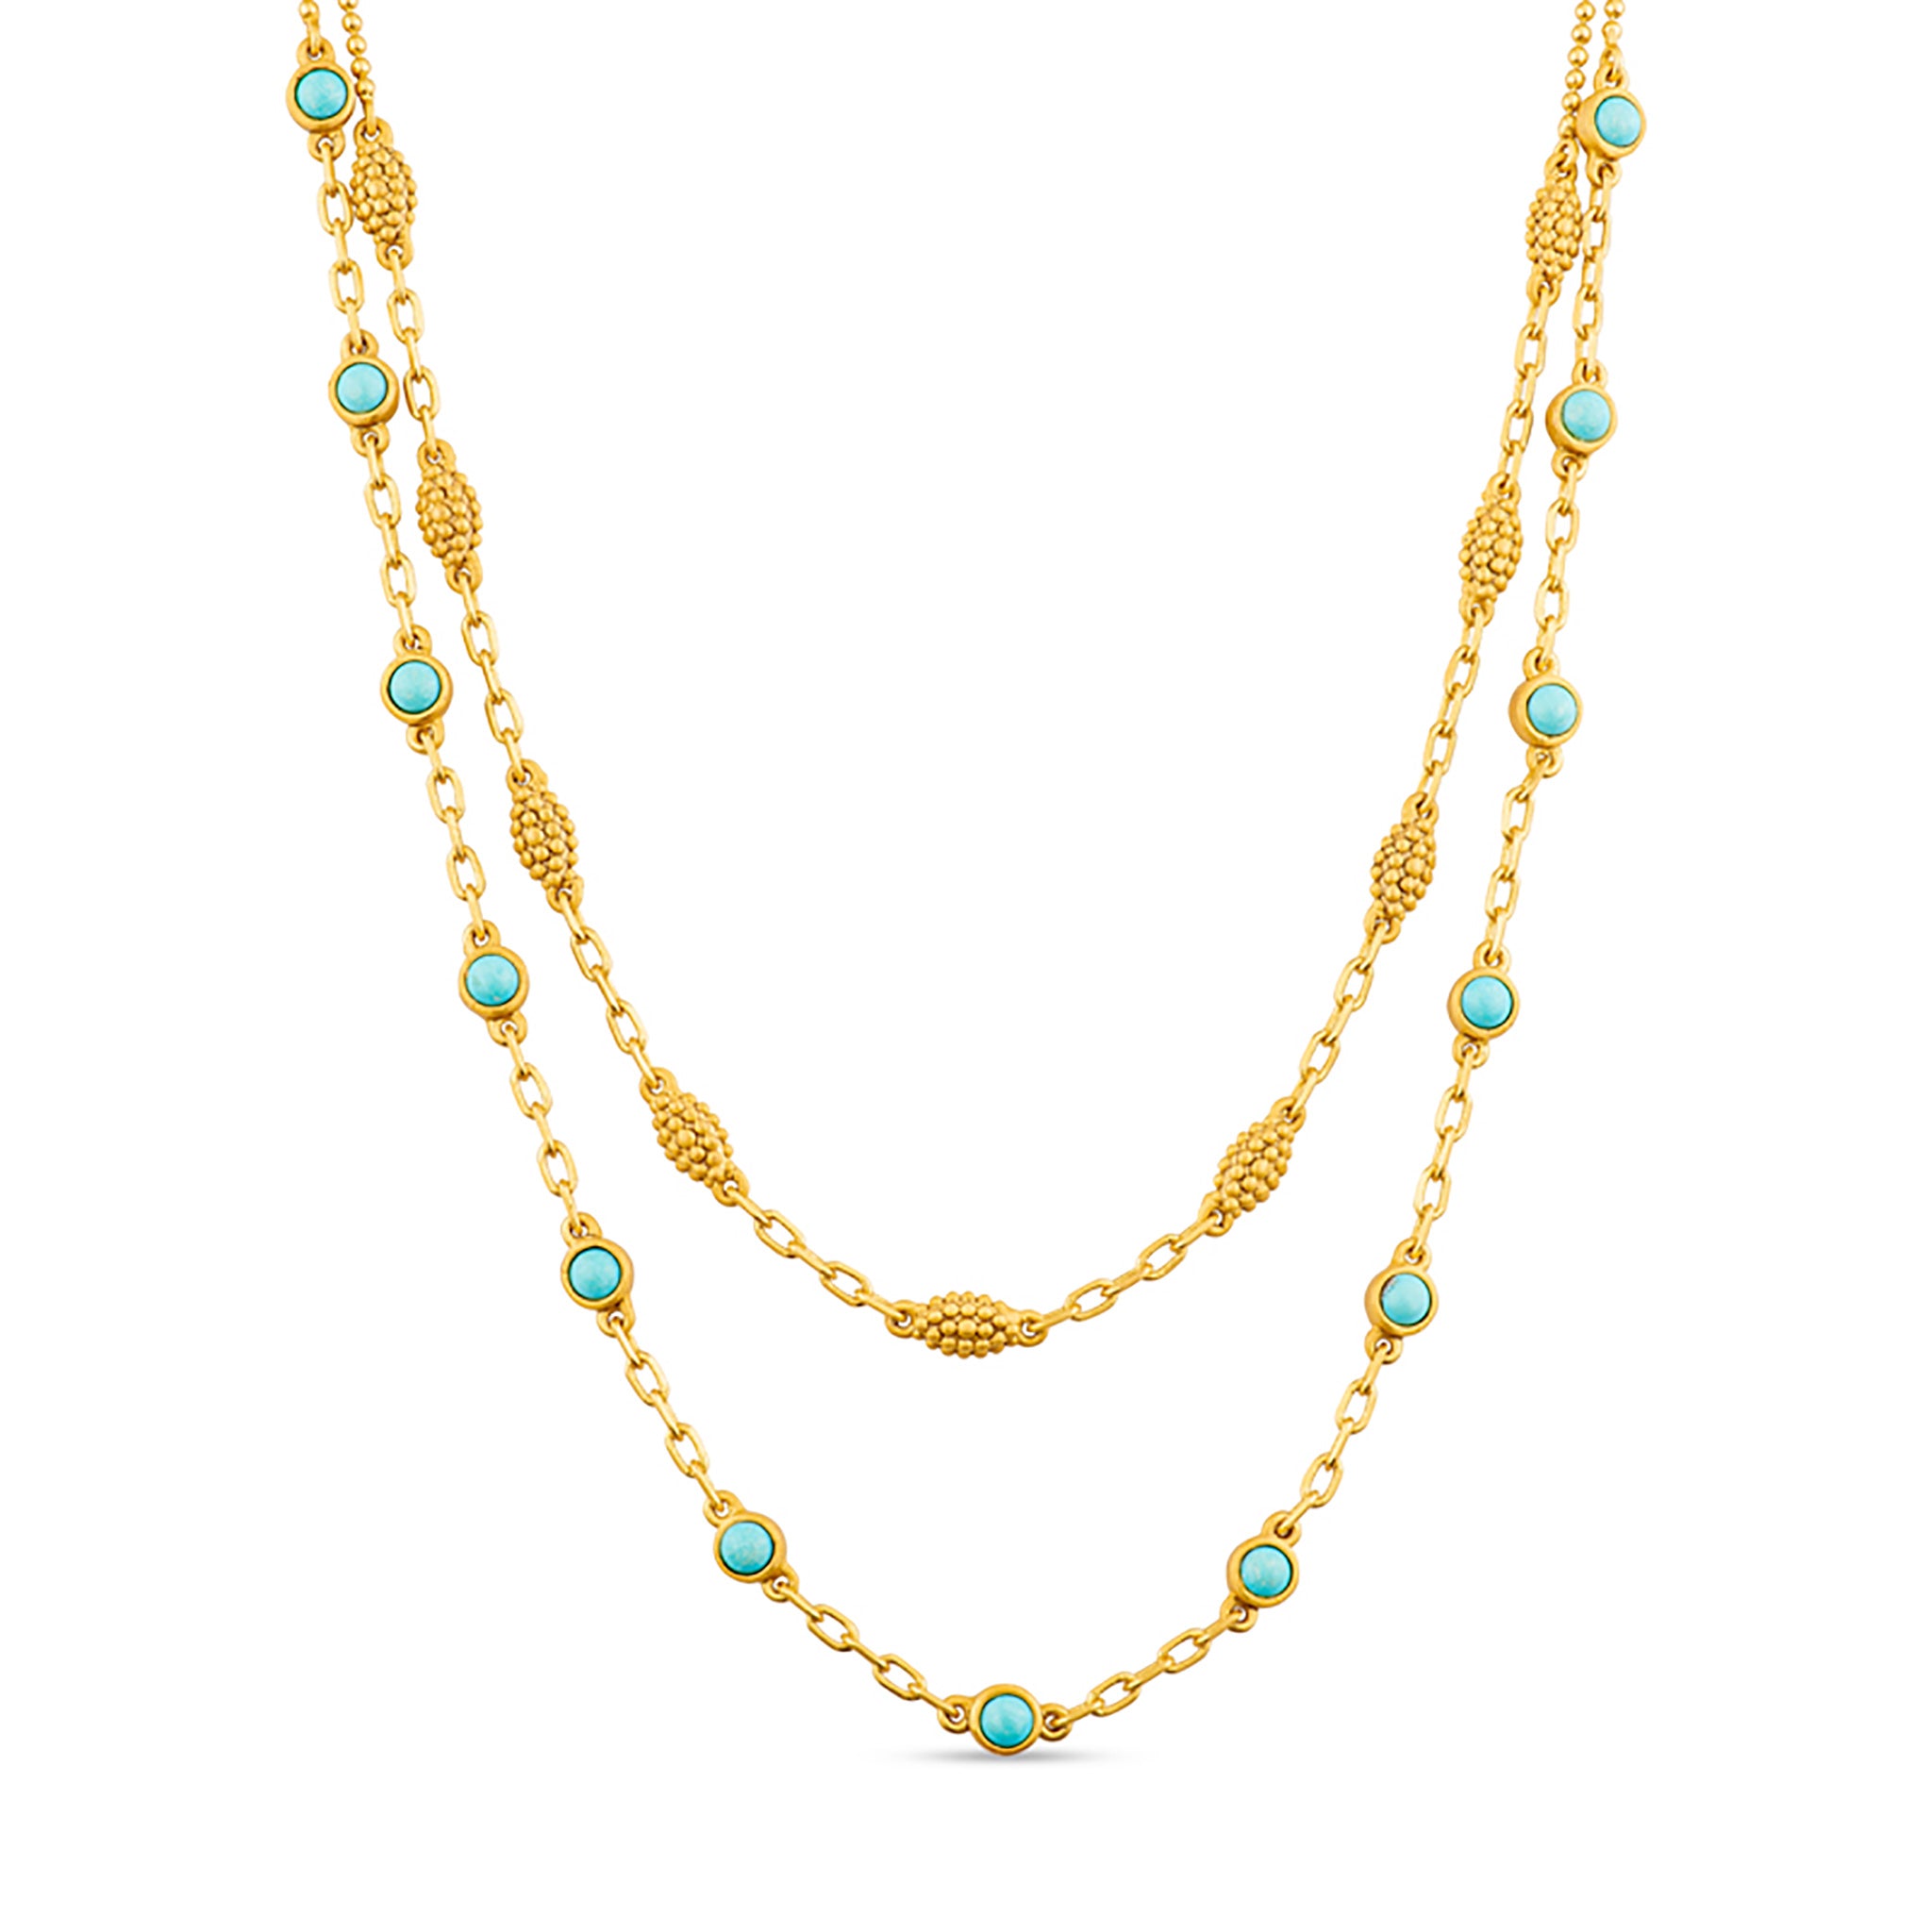 Birds of a Feather Layered Necklace– Christina Greene